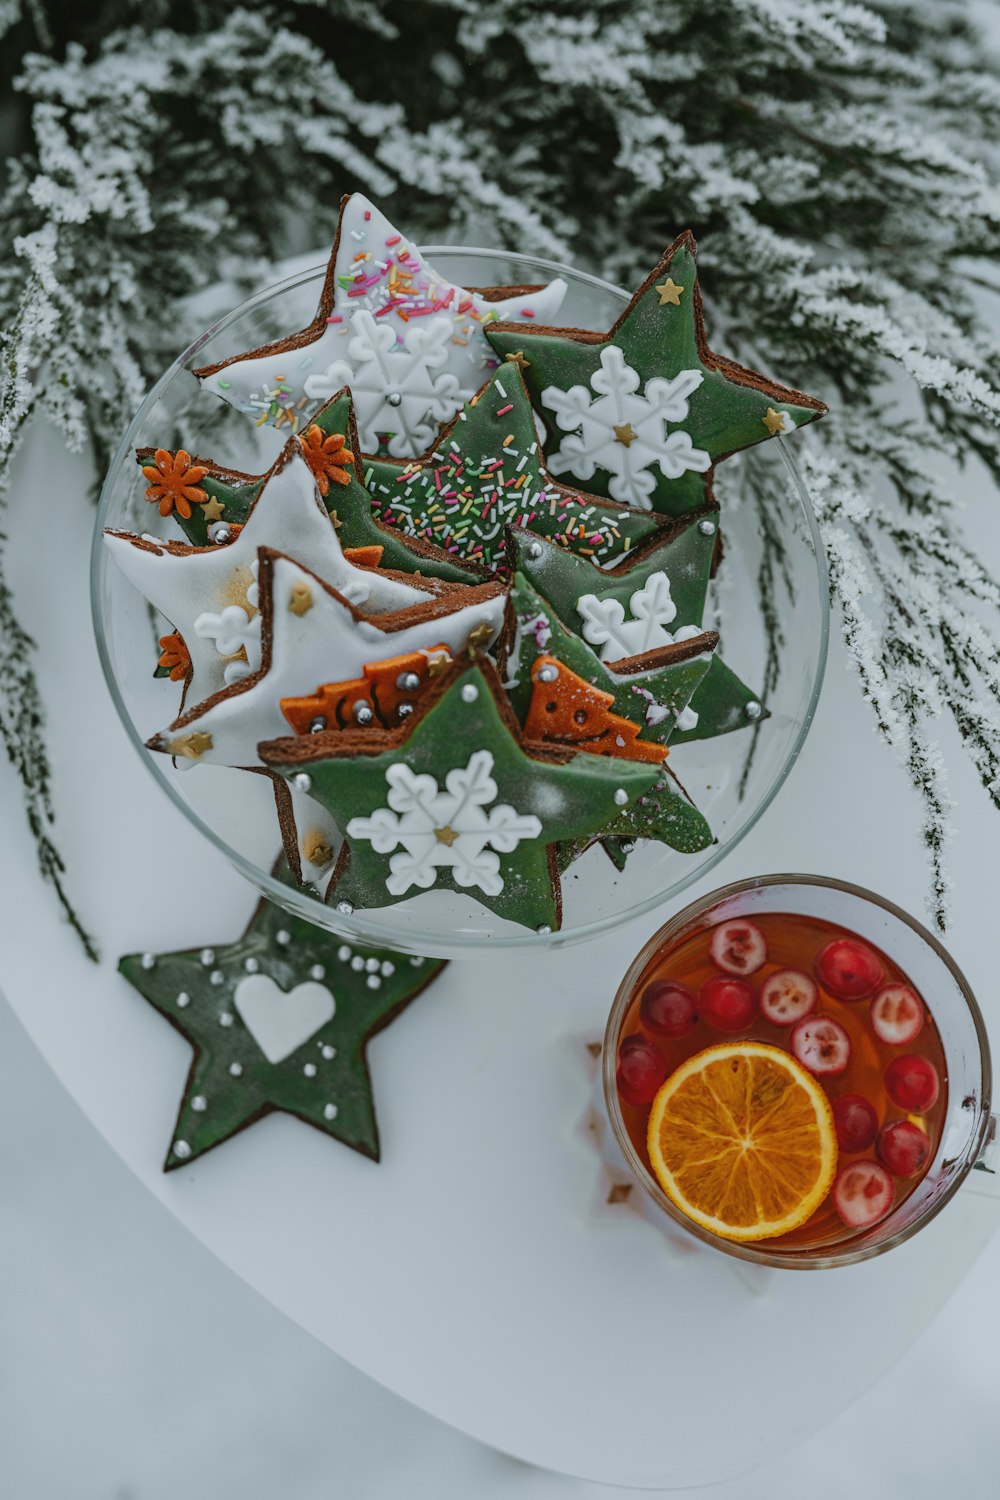 a plate of decorated cookies next to a cup of tea